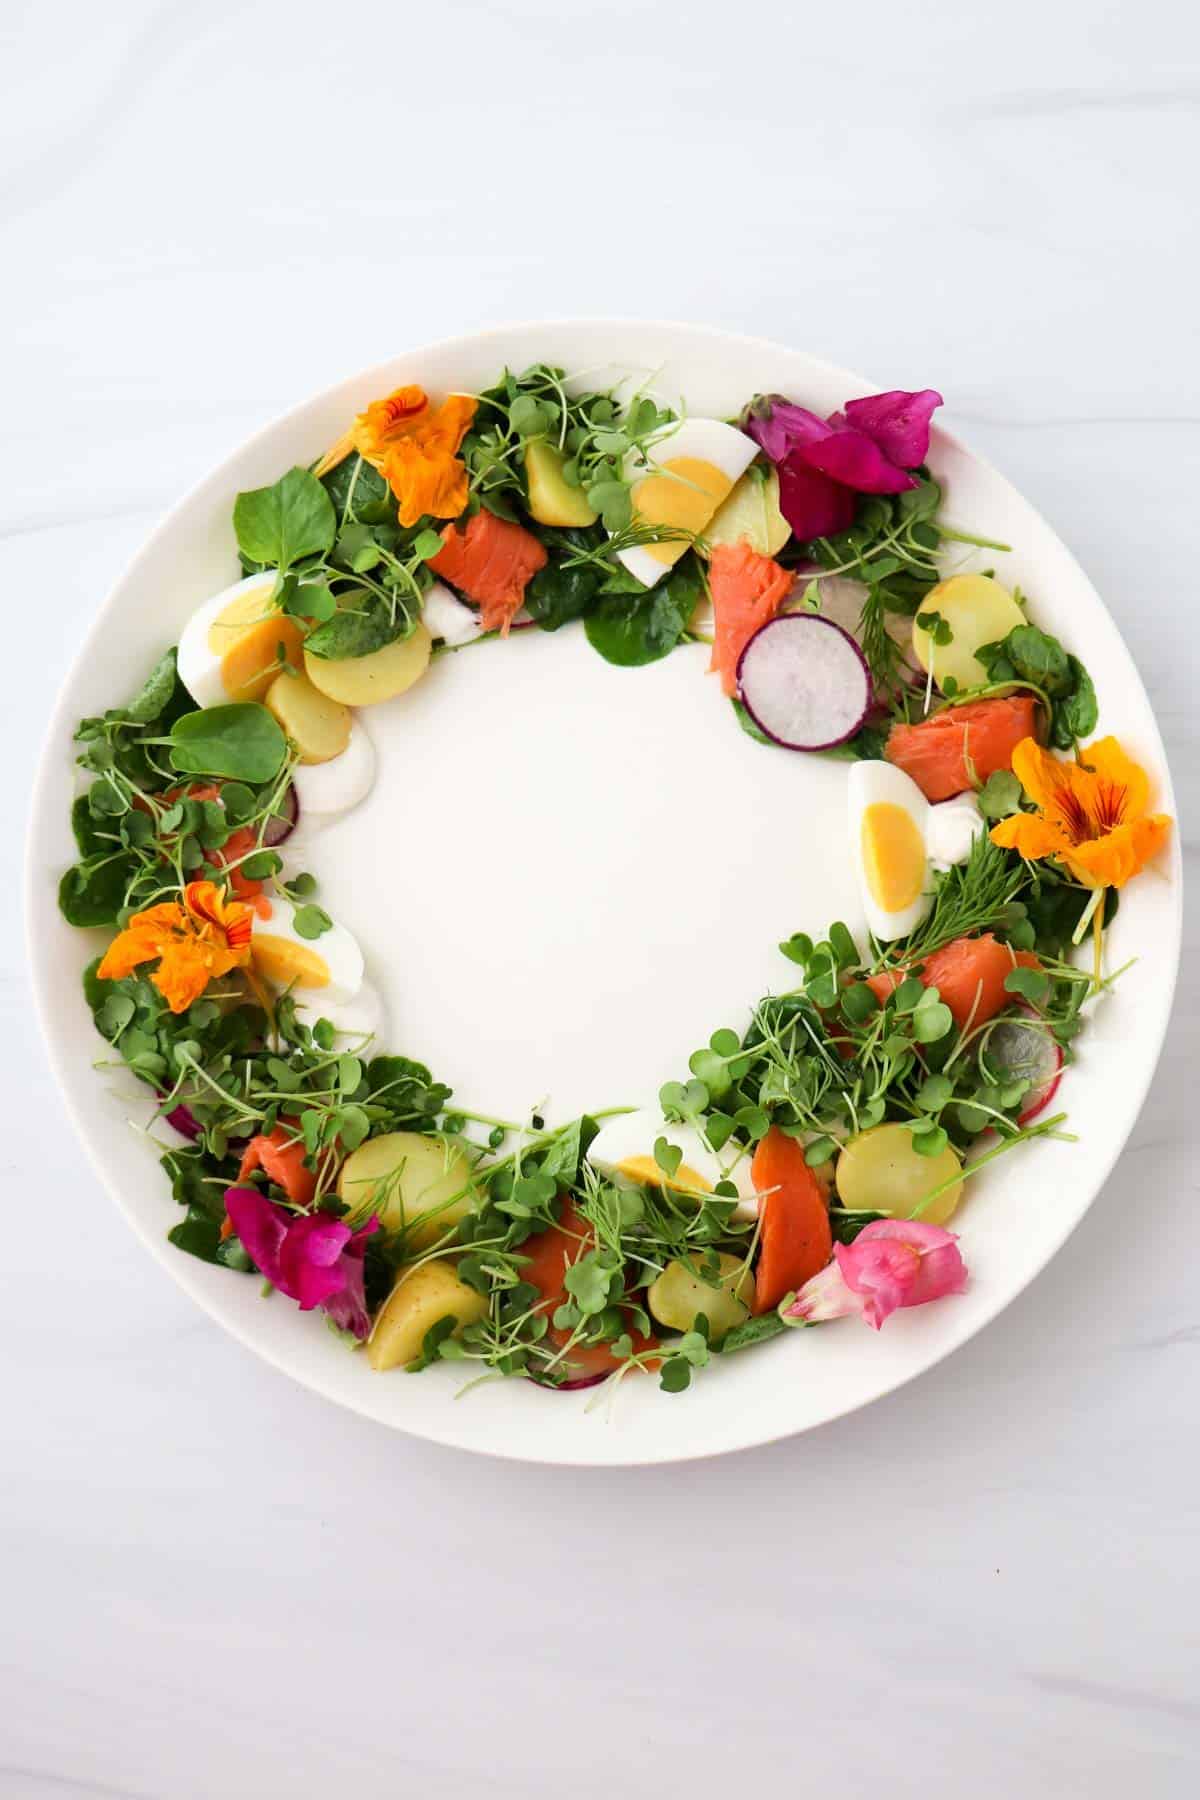 Midsummer Salad in the shape of a wreath on a white plate.